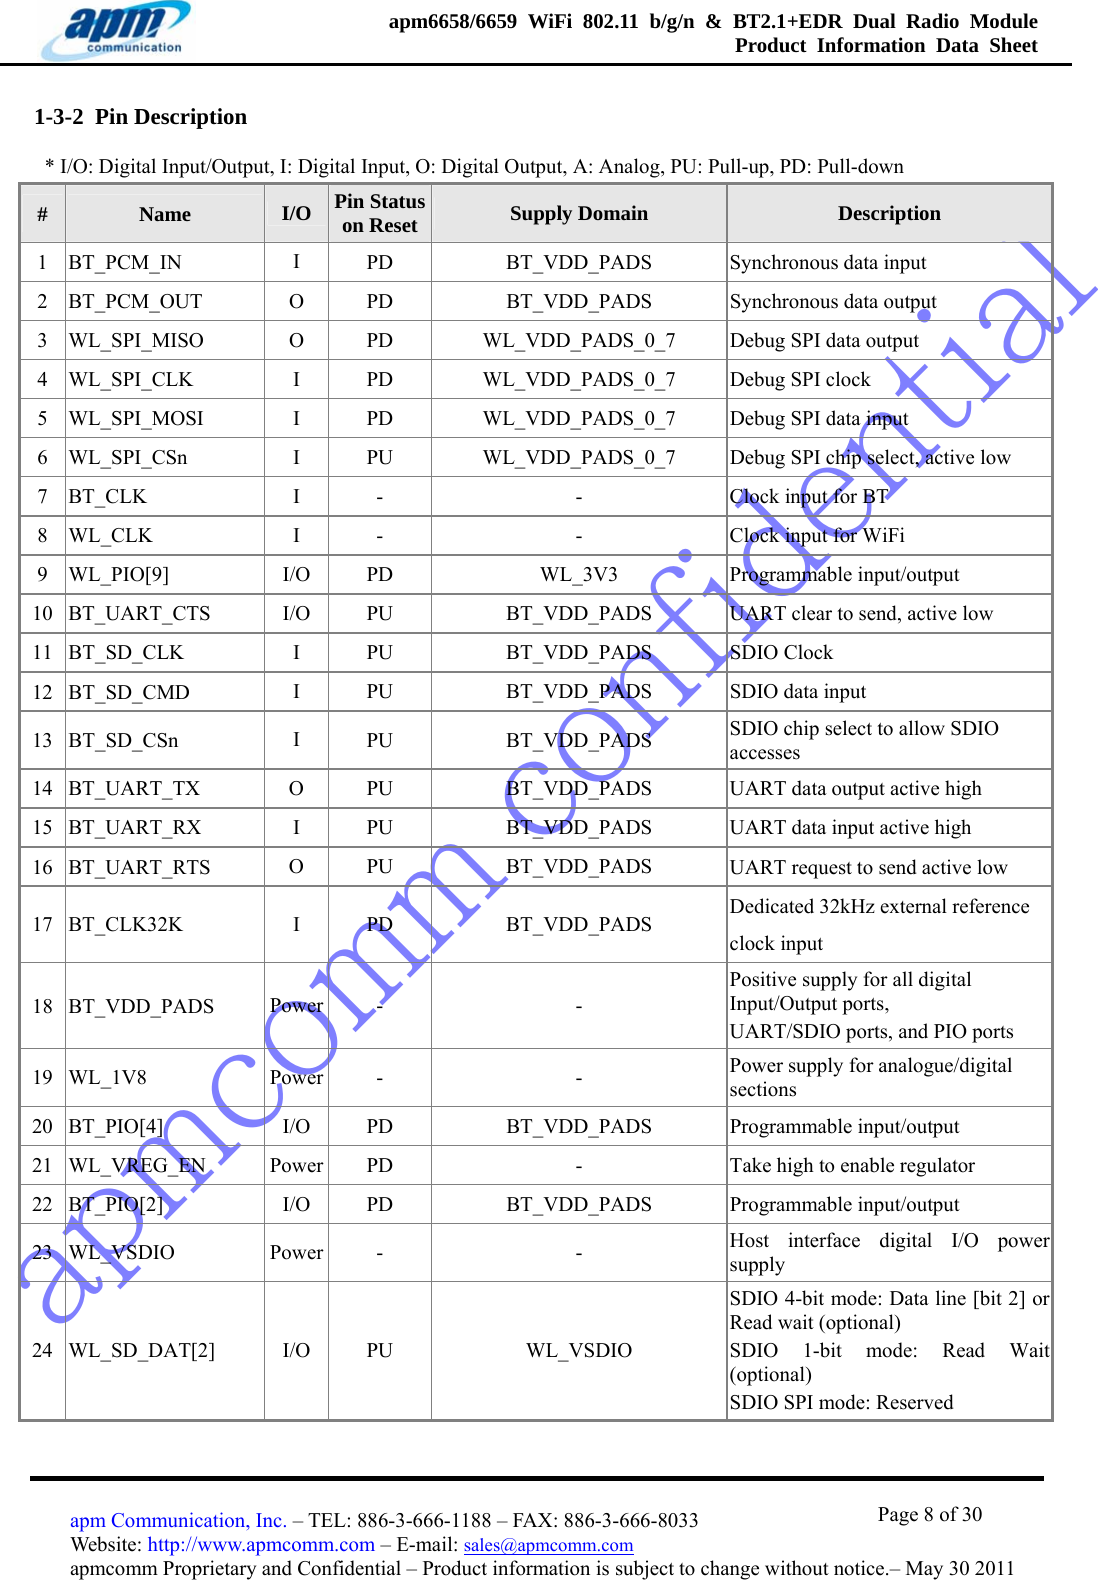 apmcomm confidentialapm6658/6659 WiFi 802.11 b/g/n &amp; BT2.1+EDR Dual Radio Module  Product Information Data Sheet                                       Page 8 of 30 apm Communication, Inc. – TEL: 886-3-666-1188 – FAX: 886-3-666-8033 Website: http://www.apmcomm.com – E-mail: sales@apmcomm.com  apmcomm Proprietary and Confidential – Product information is subject to change without notice.– May 30 2011 1-3-2  Pin Description * I/O: Digital Input/Output, I: Digital Input, O: Digital Output, A: Analog, PU: Pull-up, PD: Pull-down #  Name  I/O  Pin Status on Reset  Supply Domain  Description 1 BT_PCM_IN  I  PD BT_VDD_PADS Synchronous data input 2 BT_PCM_OUT  O  PD BT_VDD_PADS Synchronous data output 3 WL_SPI_MISO  O  PD WL_VDD_PADS_0_7 Debug SPI data output 4 WL_SPI_CLK  I  PD WL_VDD_PADS_0_7 Debug SPI clock 5 WL_SPI_MOSI  I  PD WL_VDD_PADS_0_7 Debug SPI data input 6 WL_SPI_CSn  I  PU WL_VDD_PADS_0_7 Debug SPI chip select, active low 7 BT_CLK  I  -  -  Clock input for BT 8 WL_CLK  I  -  -  Clock input for WiFi 9 WL_PIO[9]  I/O  PD WL_3V3 Programmable input/output 10 BT_UART_CTS  I/O  PU BT_VDD_PADS UART clear to send, active low 11 BT_SD_CLK  I  PU BT_VDD_PADS SDIO Clock 12 BT_SD_CMD  I  PU BT_VDD_PADS SDIO data input 13 BT_SD_CSn  I  PU BT_VDD_PADS SDIO chip select to allow SDIO accesses 14 BT_UART_TX  O  PU BT_VDD_PADS UART data output active high 15 BT_UART_RX  I  PU BT_VDD_PADS UART data input active high 16 BT_UART_RTS  O  PU BT_VDD_PADS UART request to send active low 17 BT_CLK32K  I  PD BT_VDD_PADS Dedicated 32kHz external reference clock input 18 BT_VDD_PADS  Power  - - Positive supply for all digital Input/Output ports, UART/SDIO ports, and PIO ports 19 WL_1V8  Power  - - Power supply for analogue/digital sections 20 BT_PIO[4]  I/O  PD BT_VDD_PADS Programmable input/output 21 WL_VREG_EN  Power  PD  -  Take high to enable regulator 22 BT_PIO[2]  I/O  PD BT_VDD_PADS Programmable input/output 23 WL_VSDIO  Power  - - Host interface digital I/O power supply 24 WL_SD_DAT[2]  I/O  PU WL_VSDIO SDIO 4-bit mode: Data line [bit 2] or Read wait (optional) SDIO 1-bit mode: Read Wait(optional) SDIO SPI mode: Reserved 